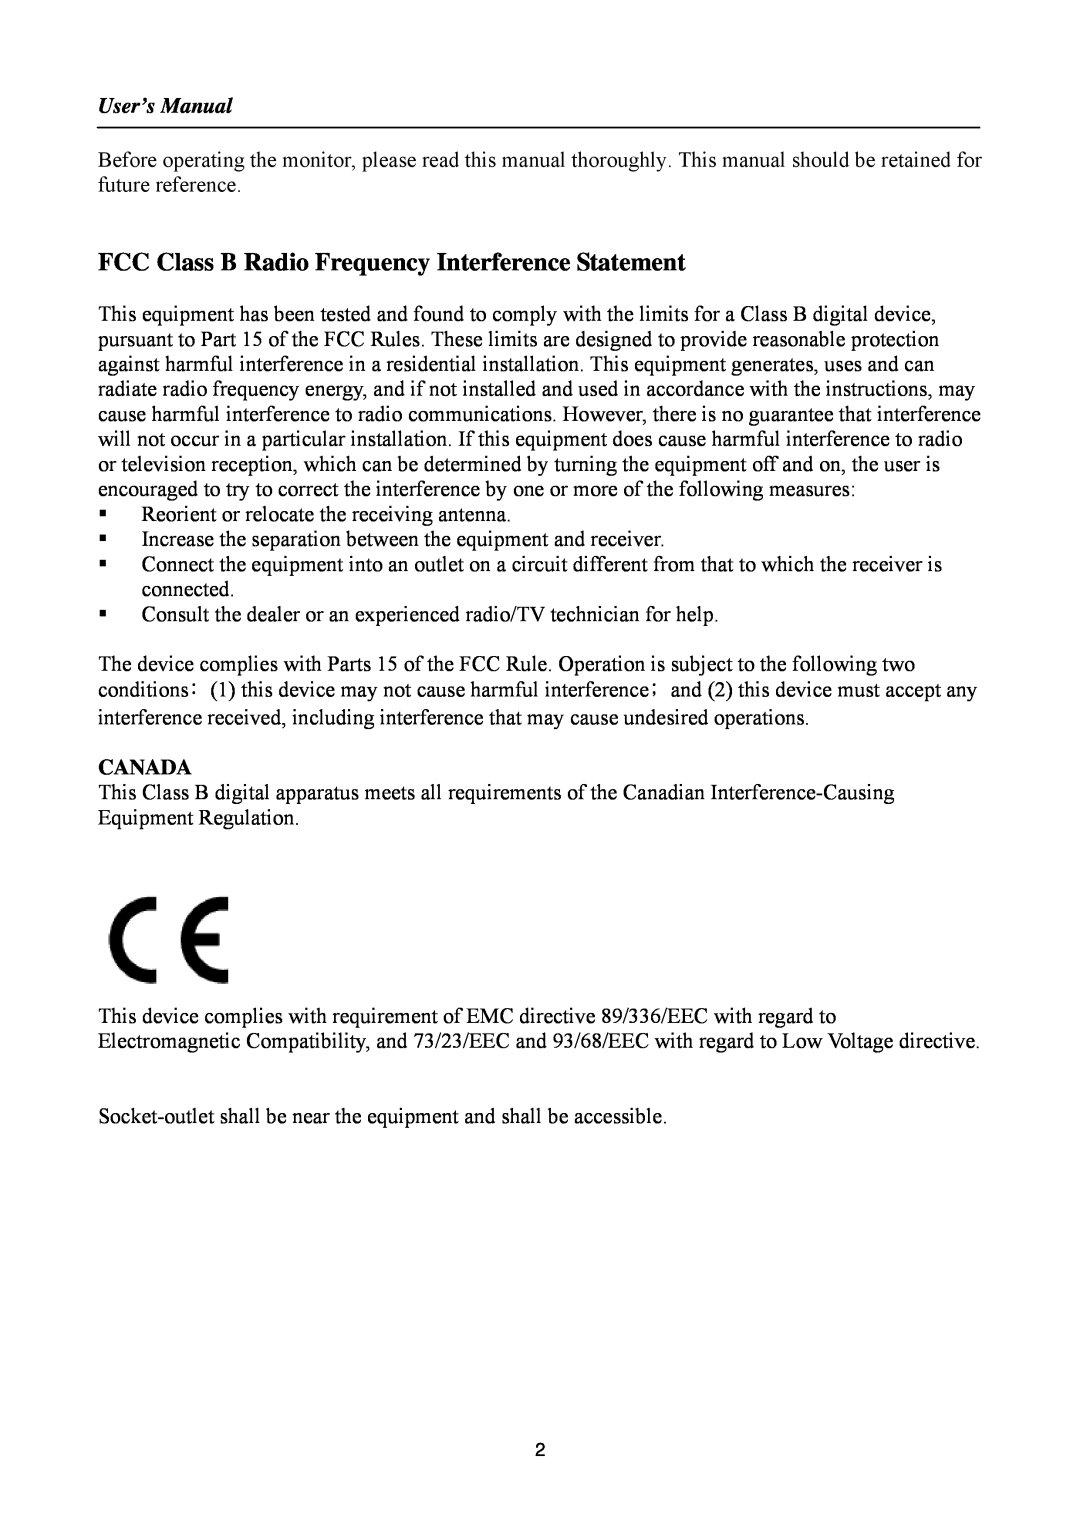 Hanns.G HSG1033 manual FCC Class B Radio Frequency Interference Statement, User’s Manual, Canada 